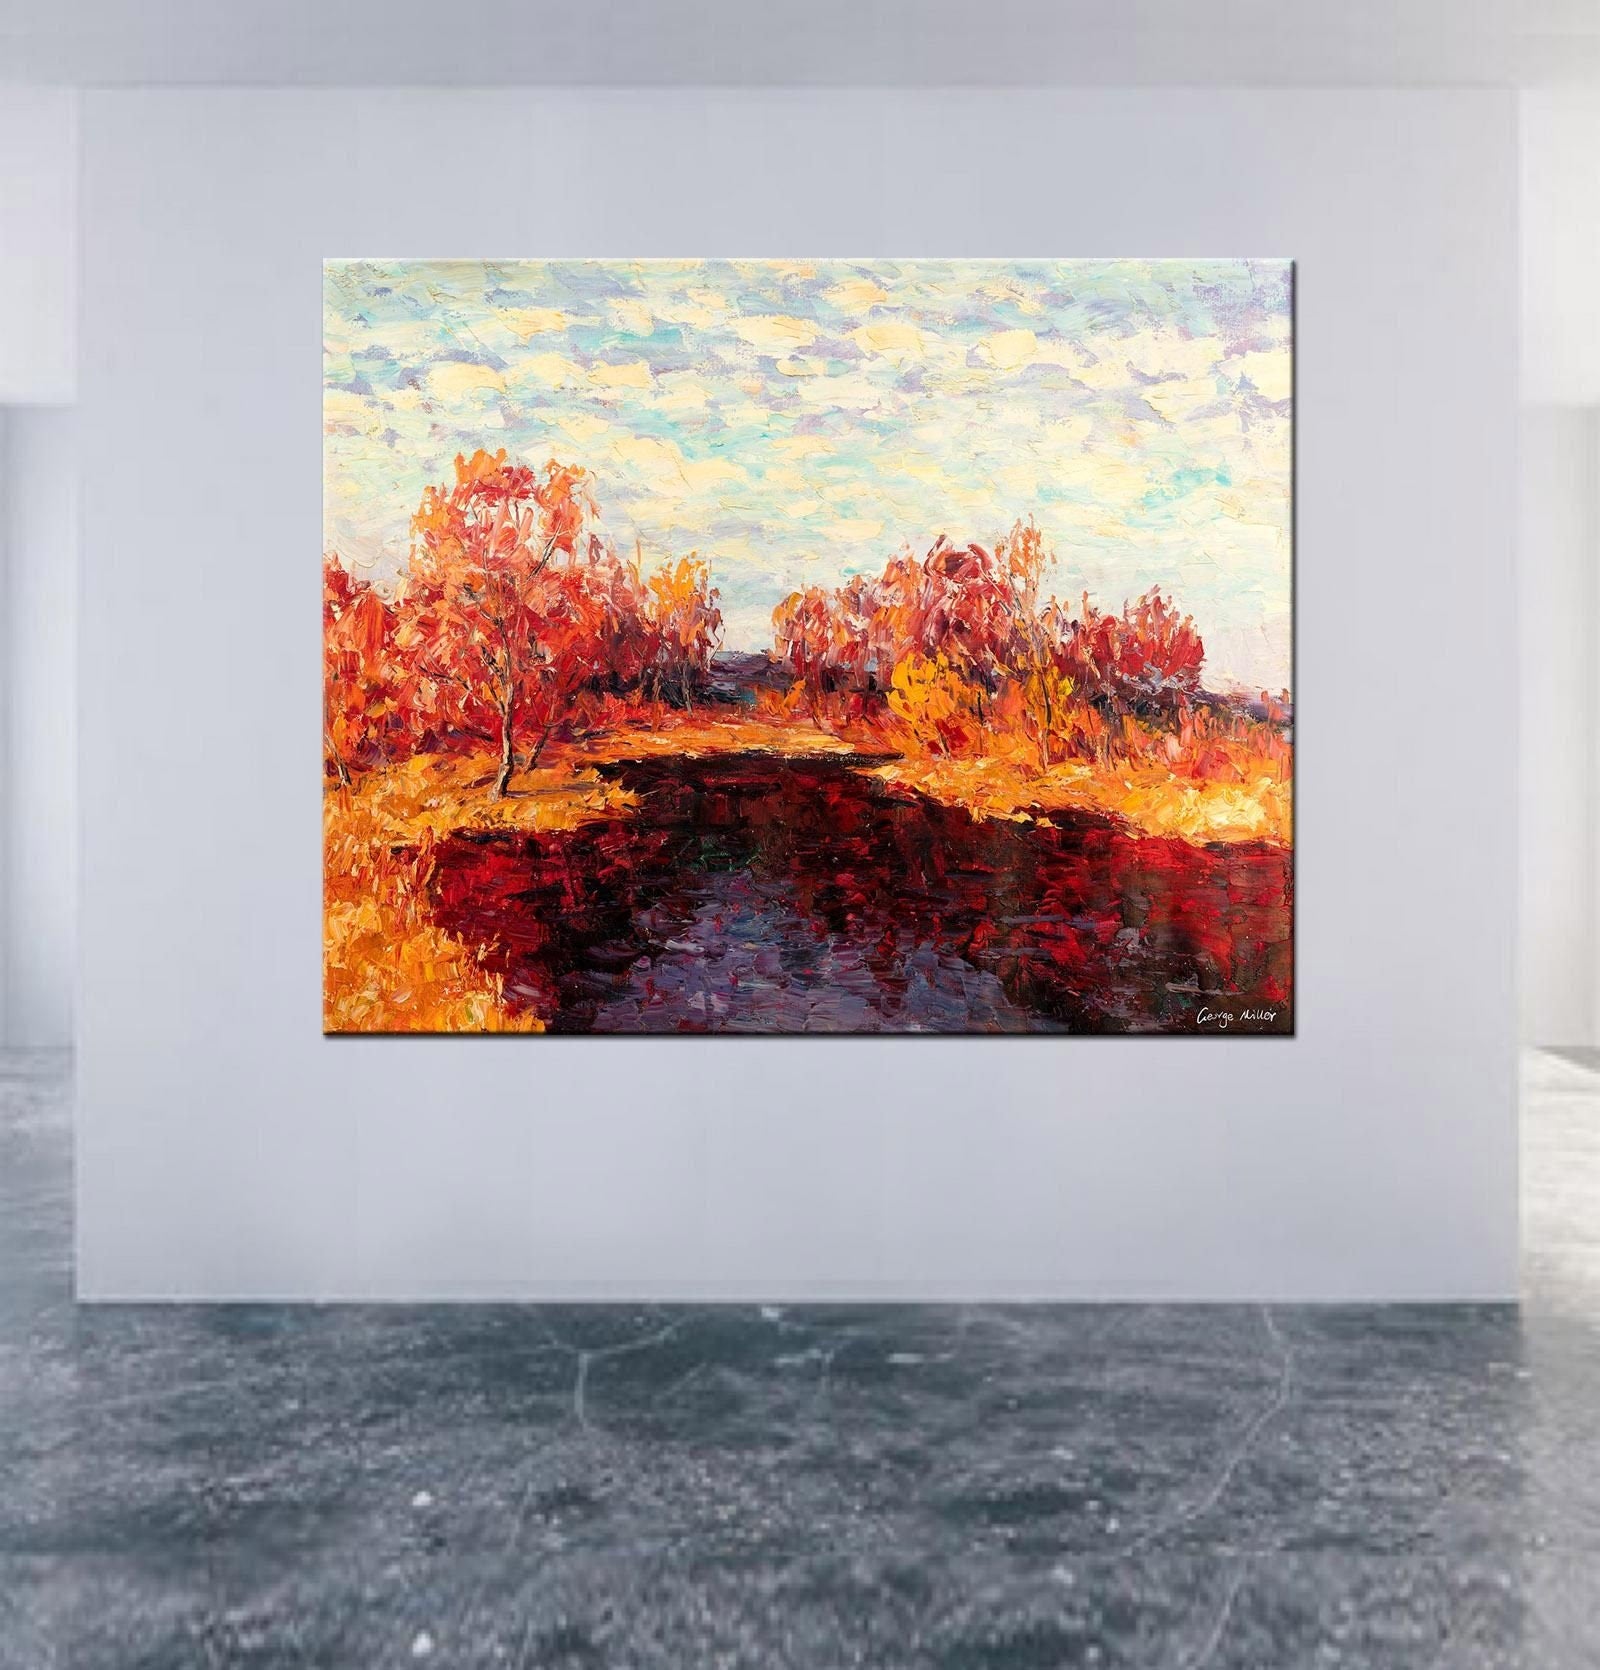 Oil Painting Autumn Wood, Wall Art, Oil On Canvas Painting, Landscape Wall Art, Oversized Wall Art, Handmade, Contemporary Artwork